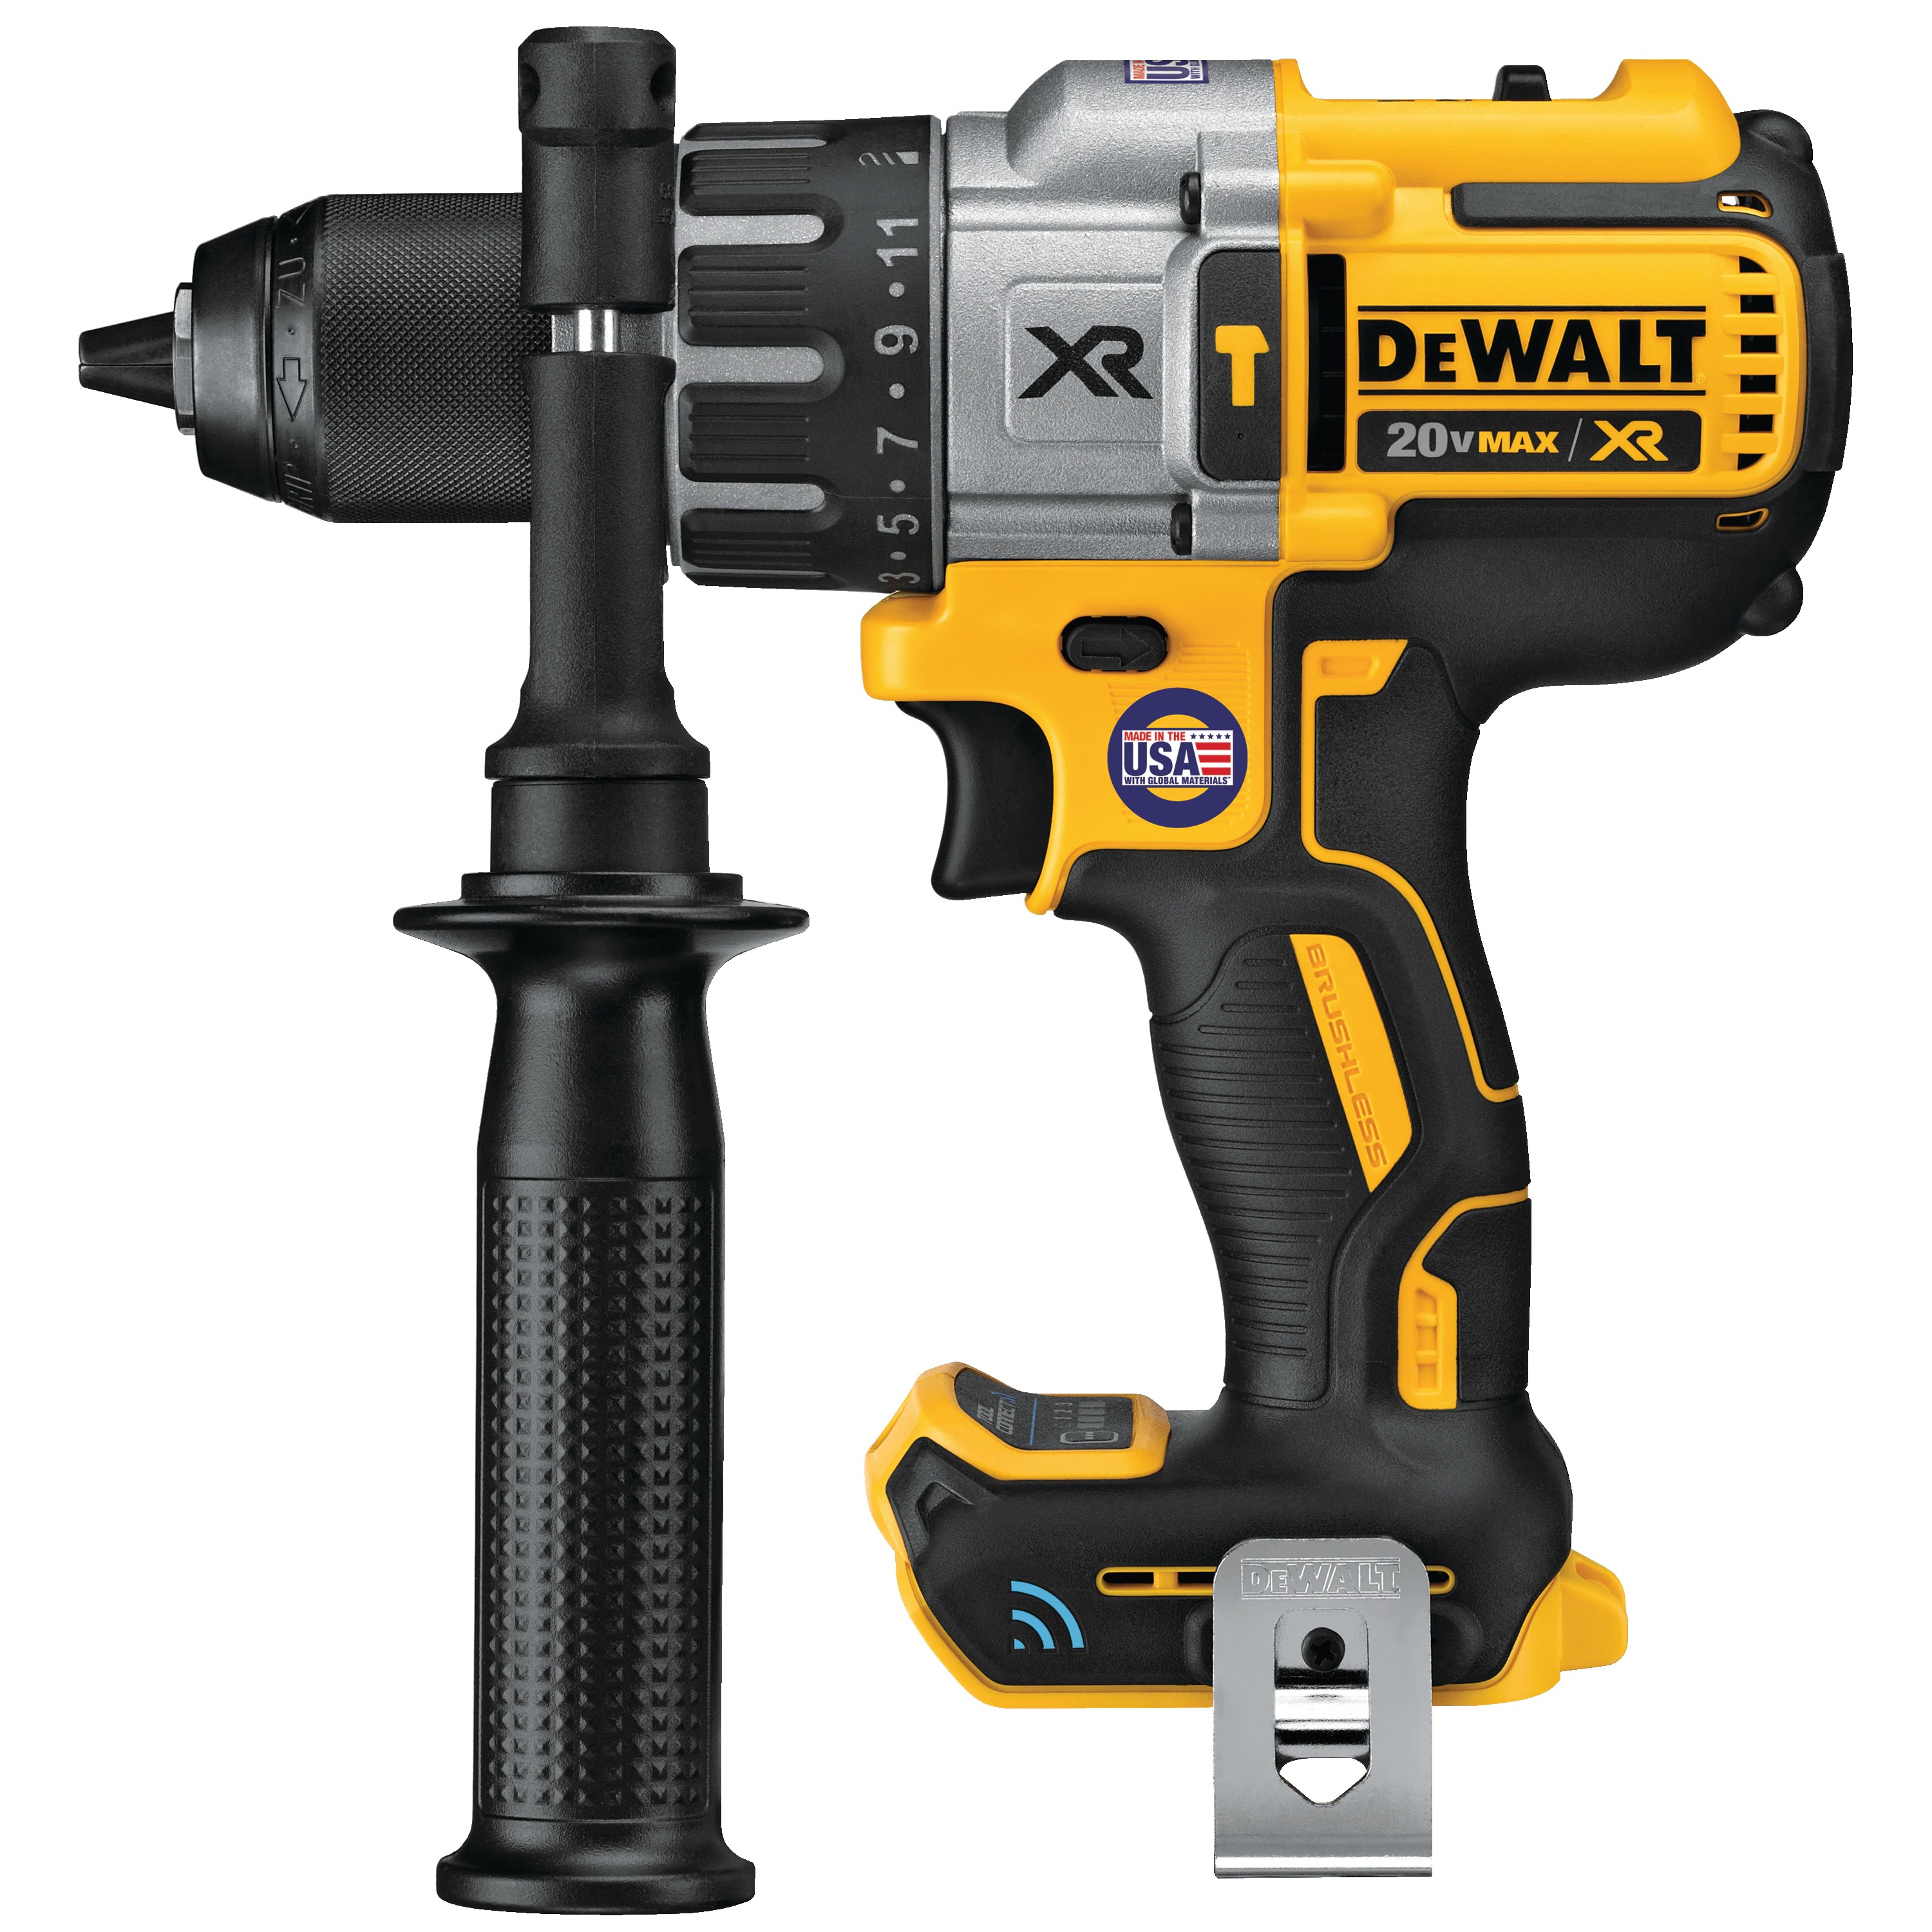 DeWalt 20V MAX* 1/2 in XR® Brushless Cordless Hammer Drill/Driver (Tool Only) - Cordless